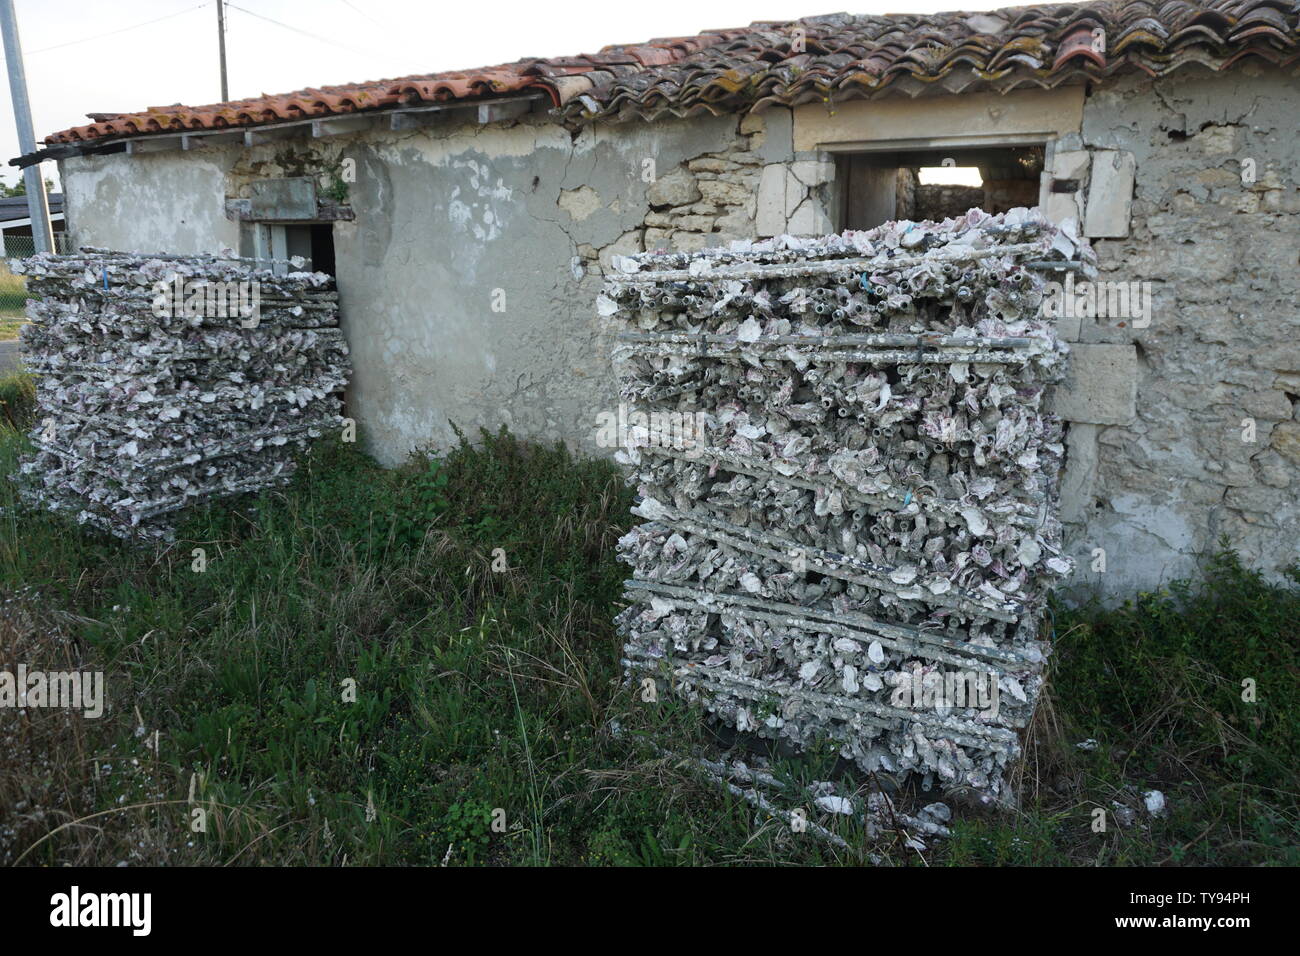 stacks of oyster shells on metal grids in front of old abandoned stone building Stock Photo